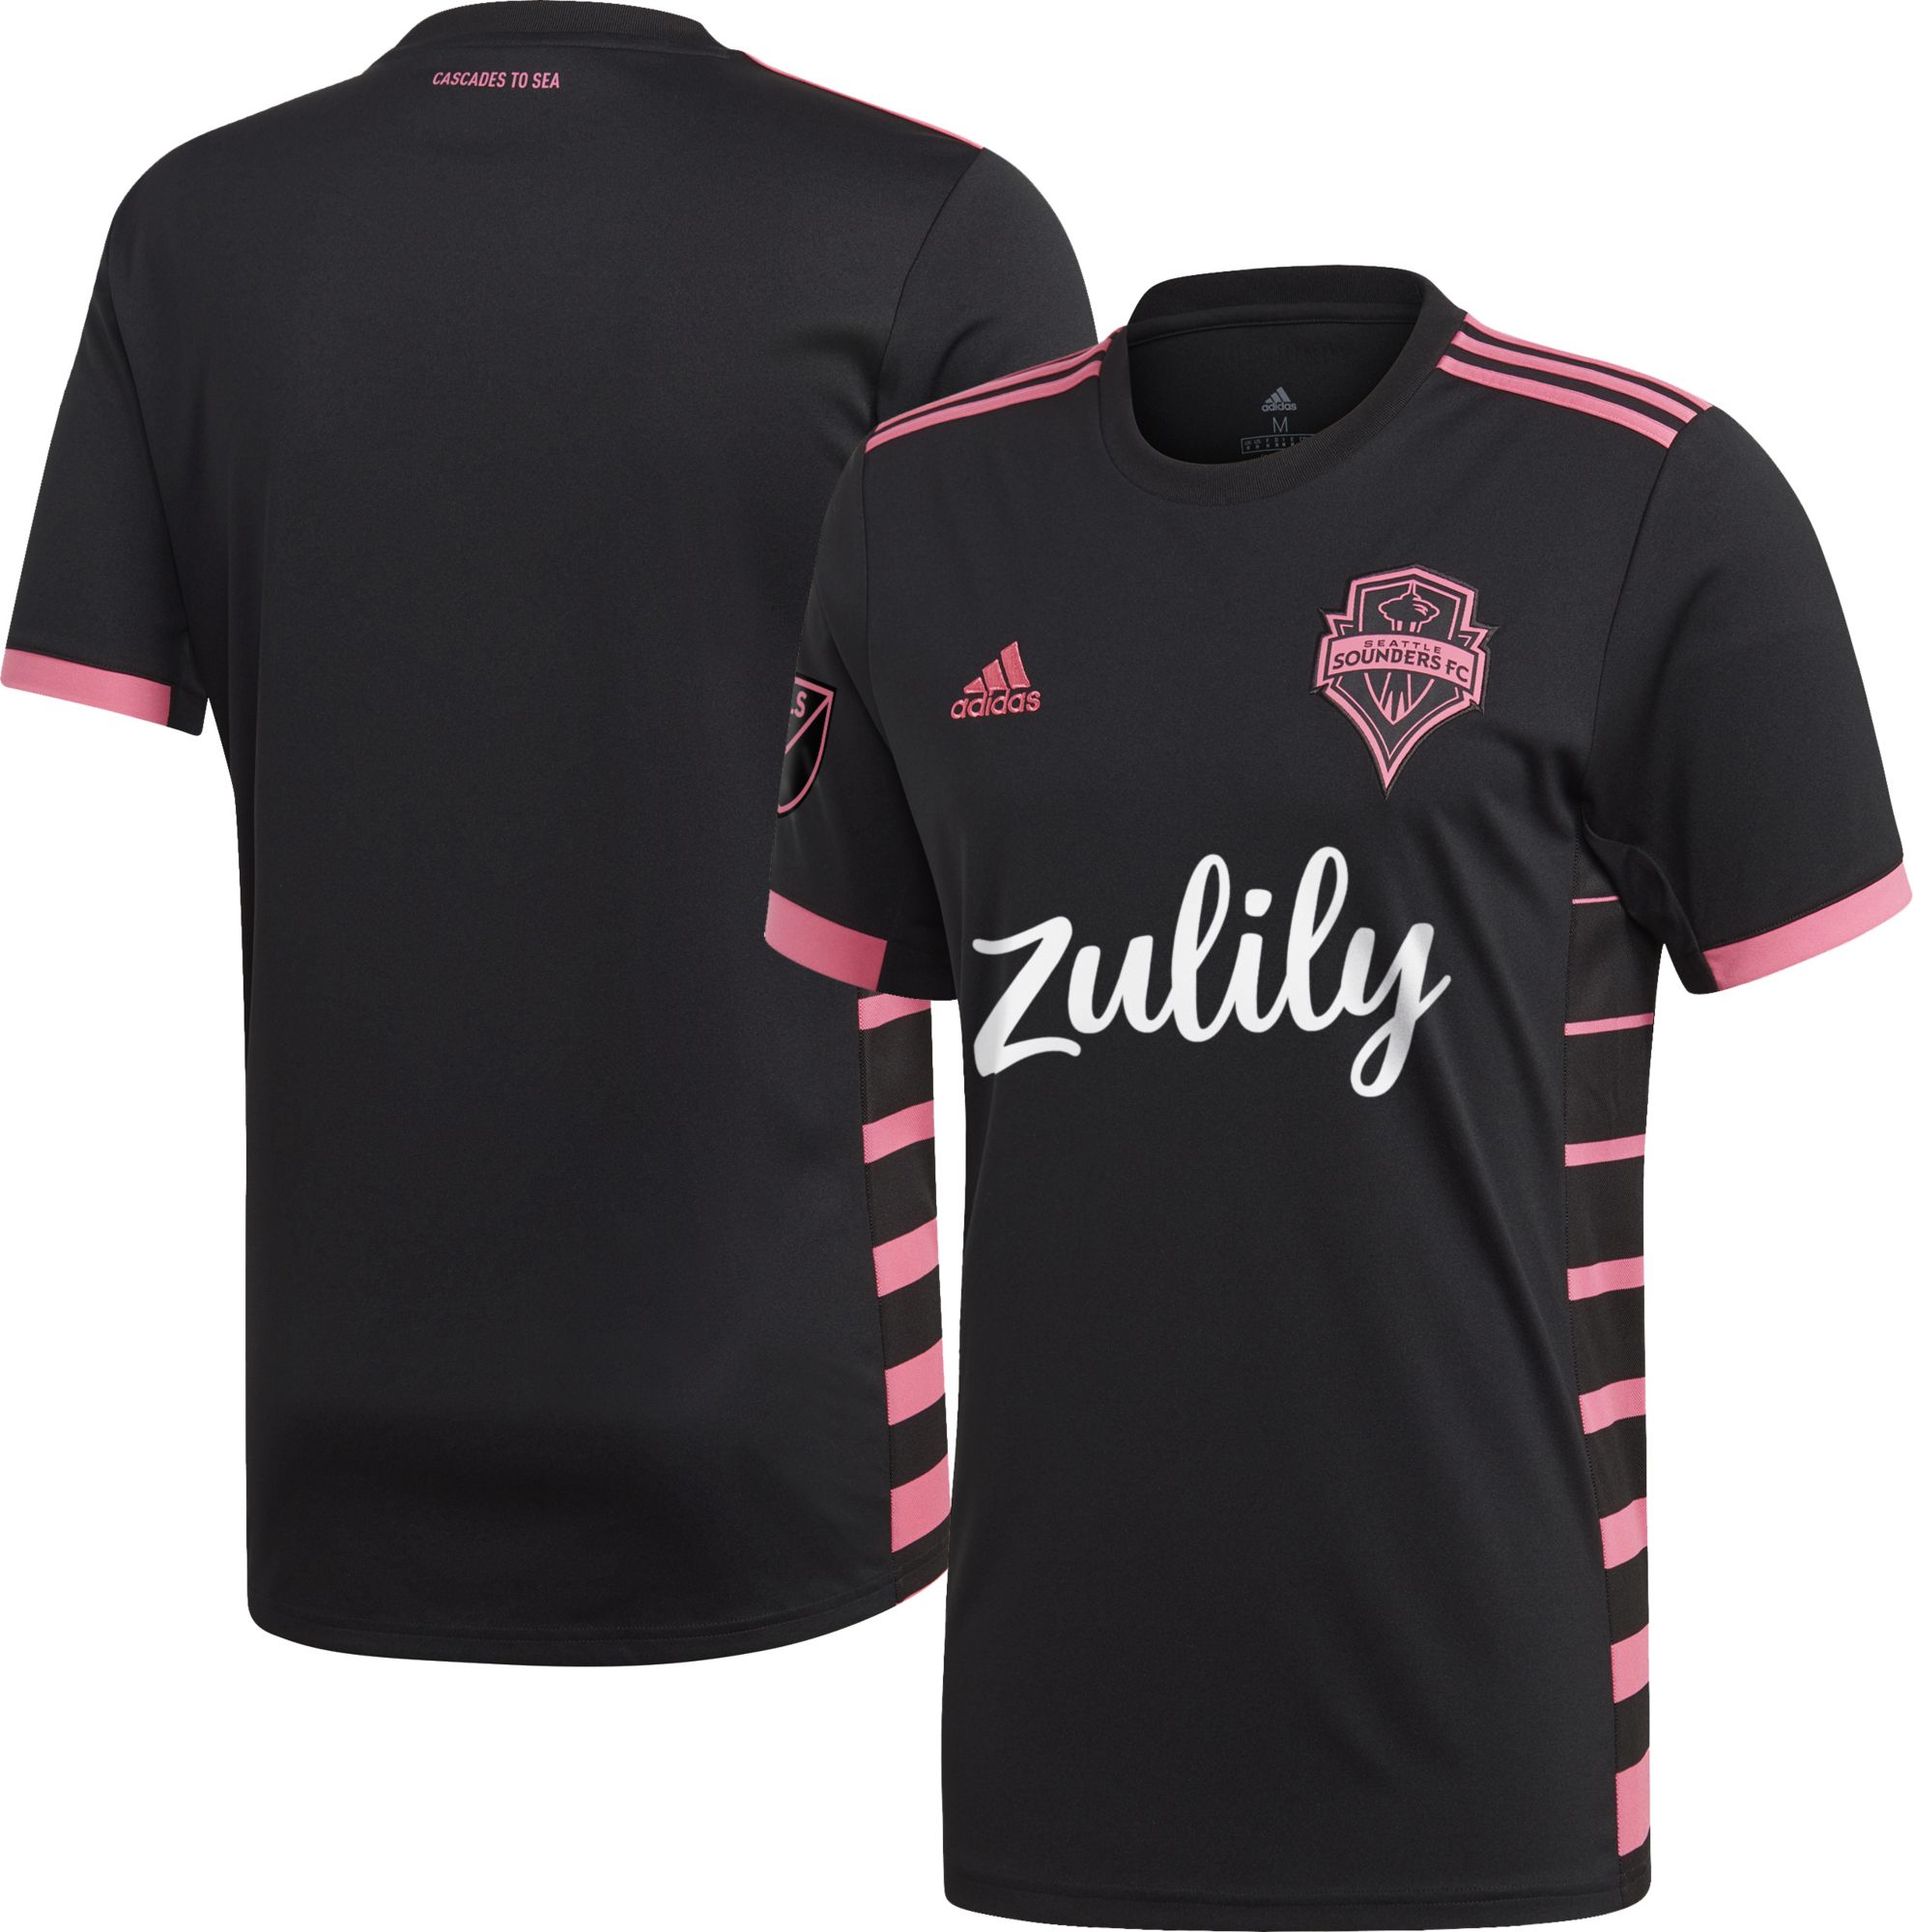 sounders youth jersey